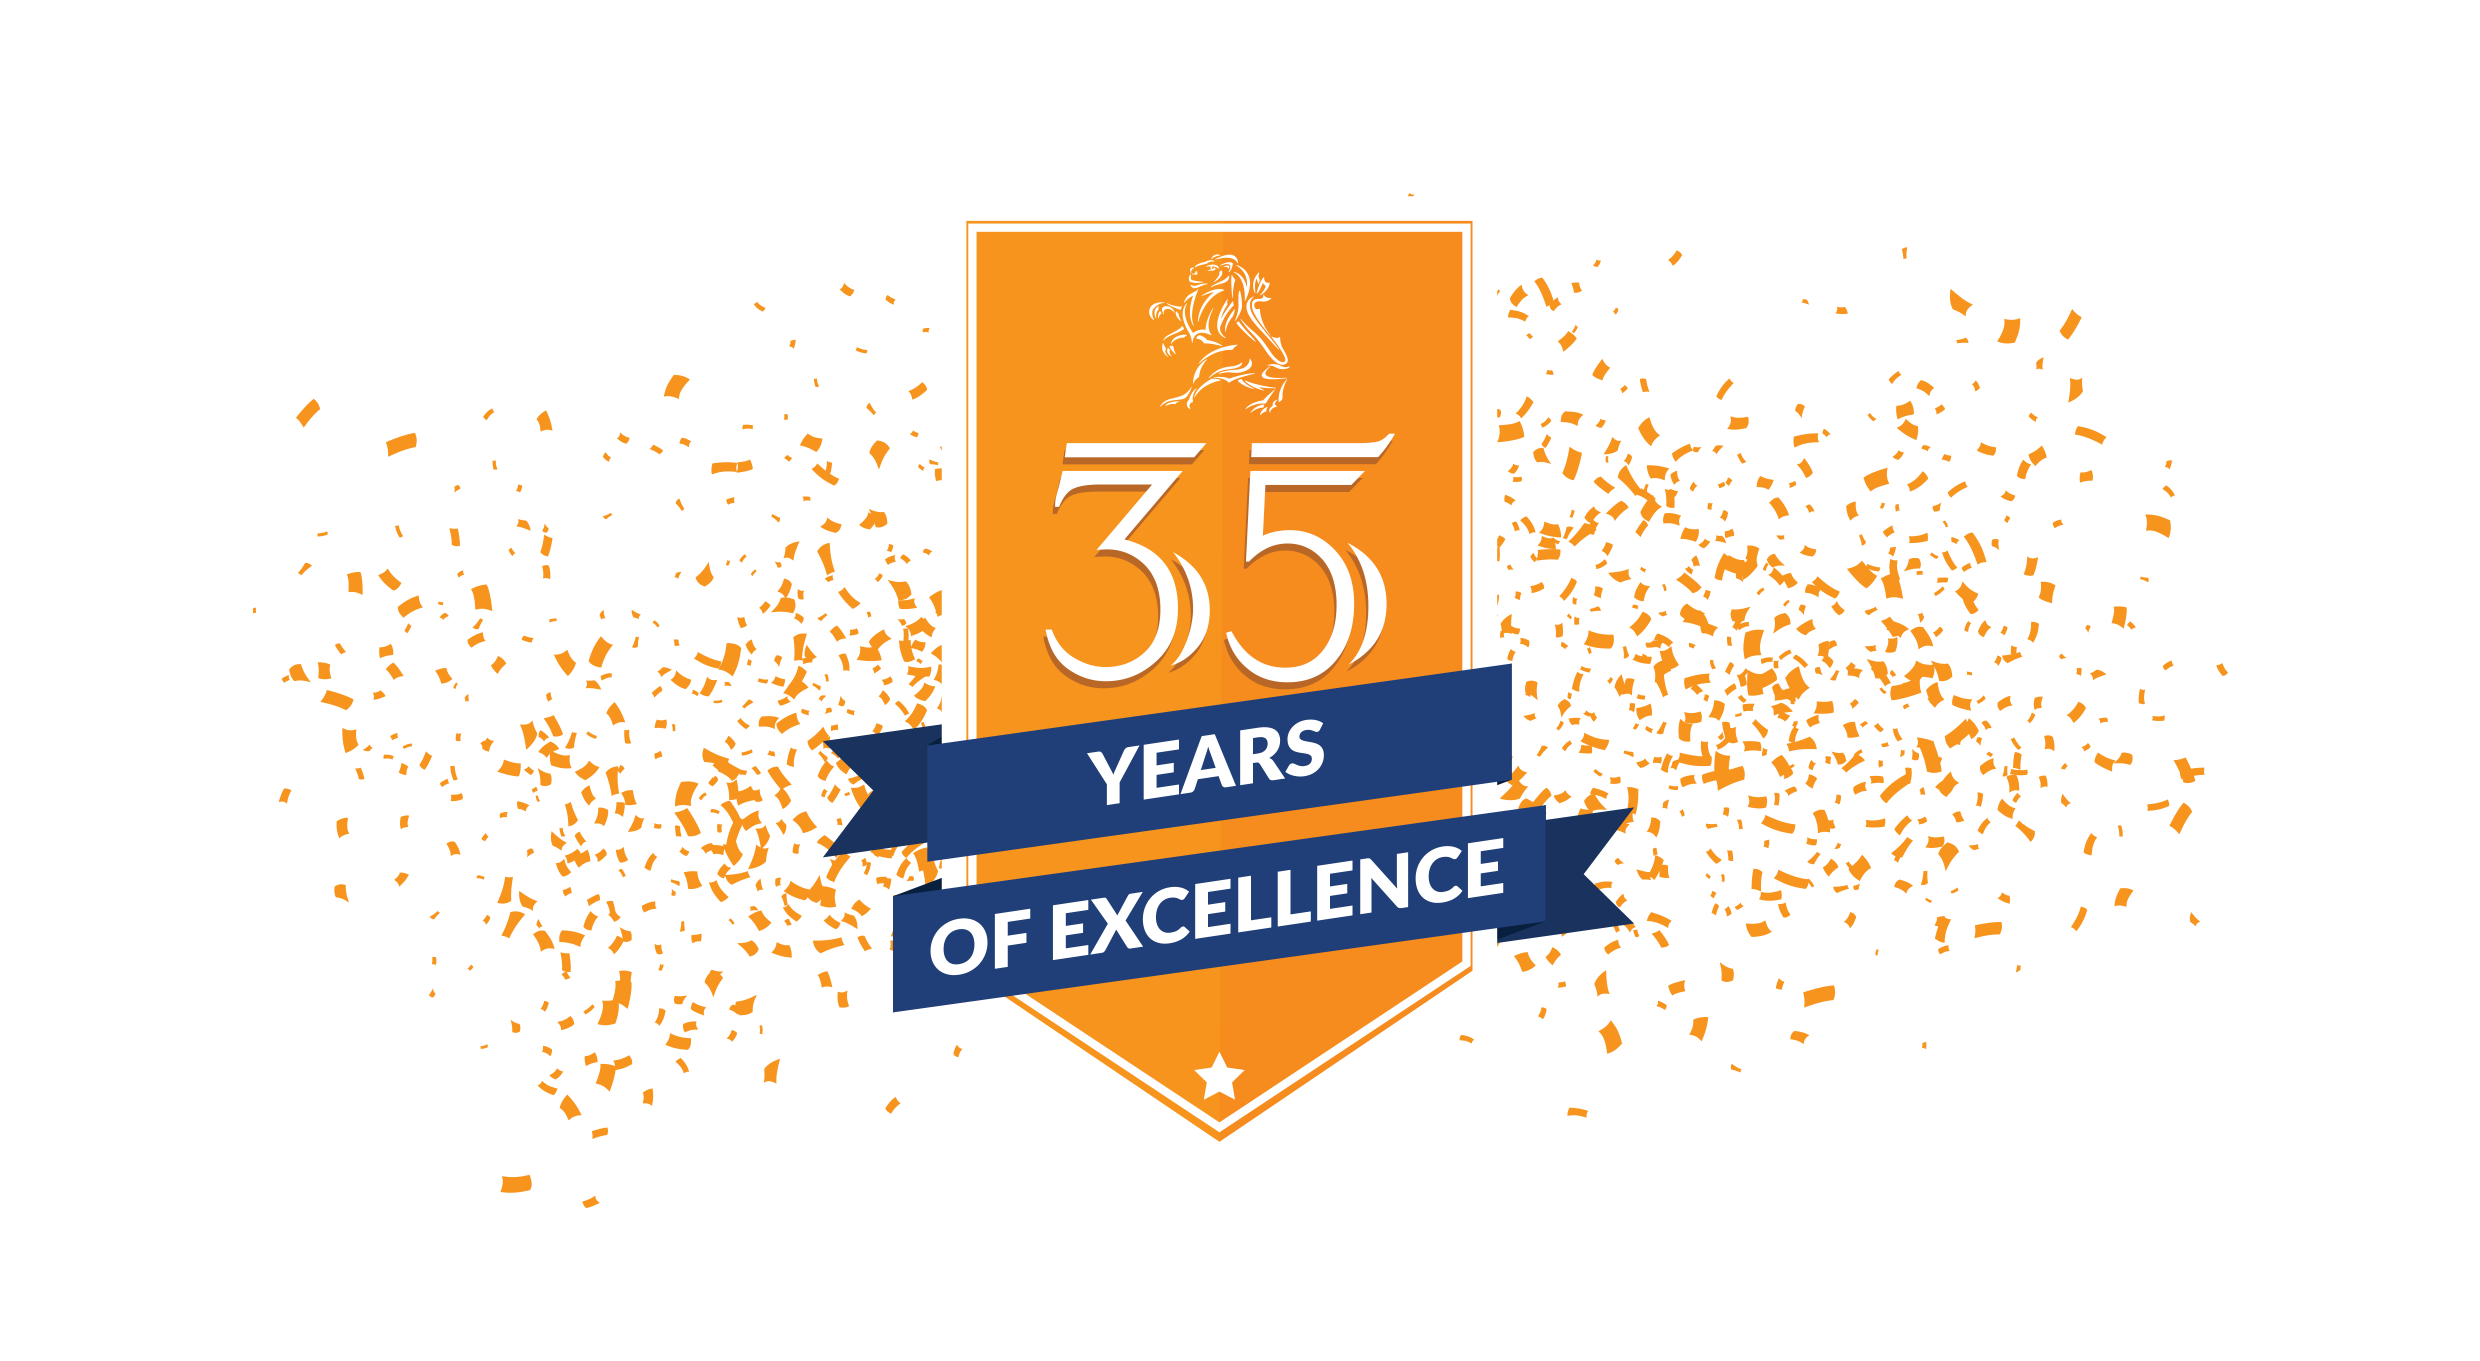 The BSN Language Centre celebrates 35 years of Excellence